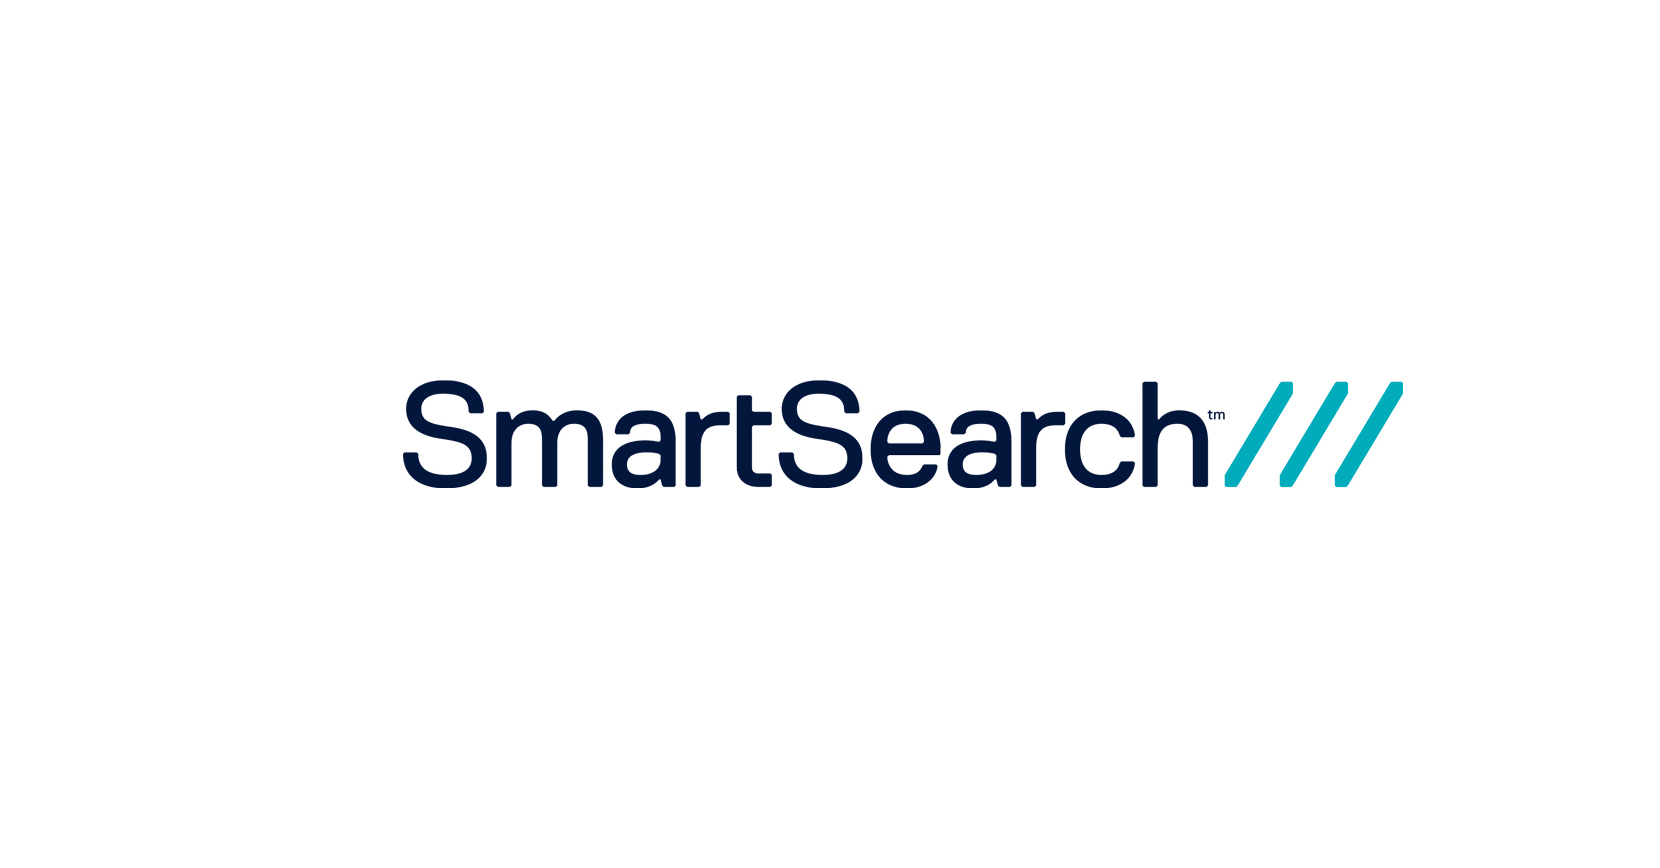 SmartSearch Warns Against Risk of GDPR Breaches 